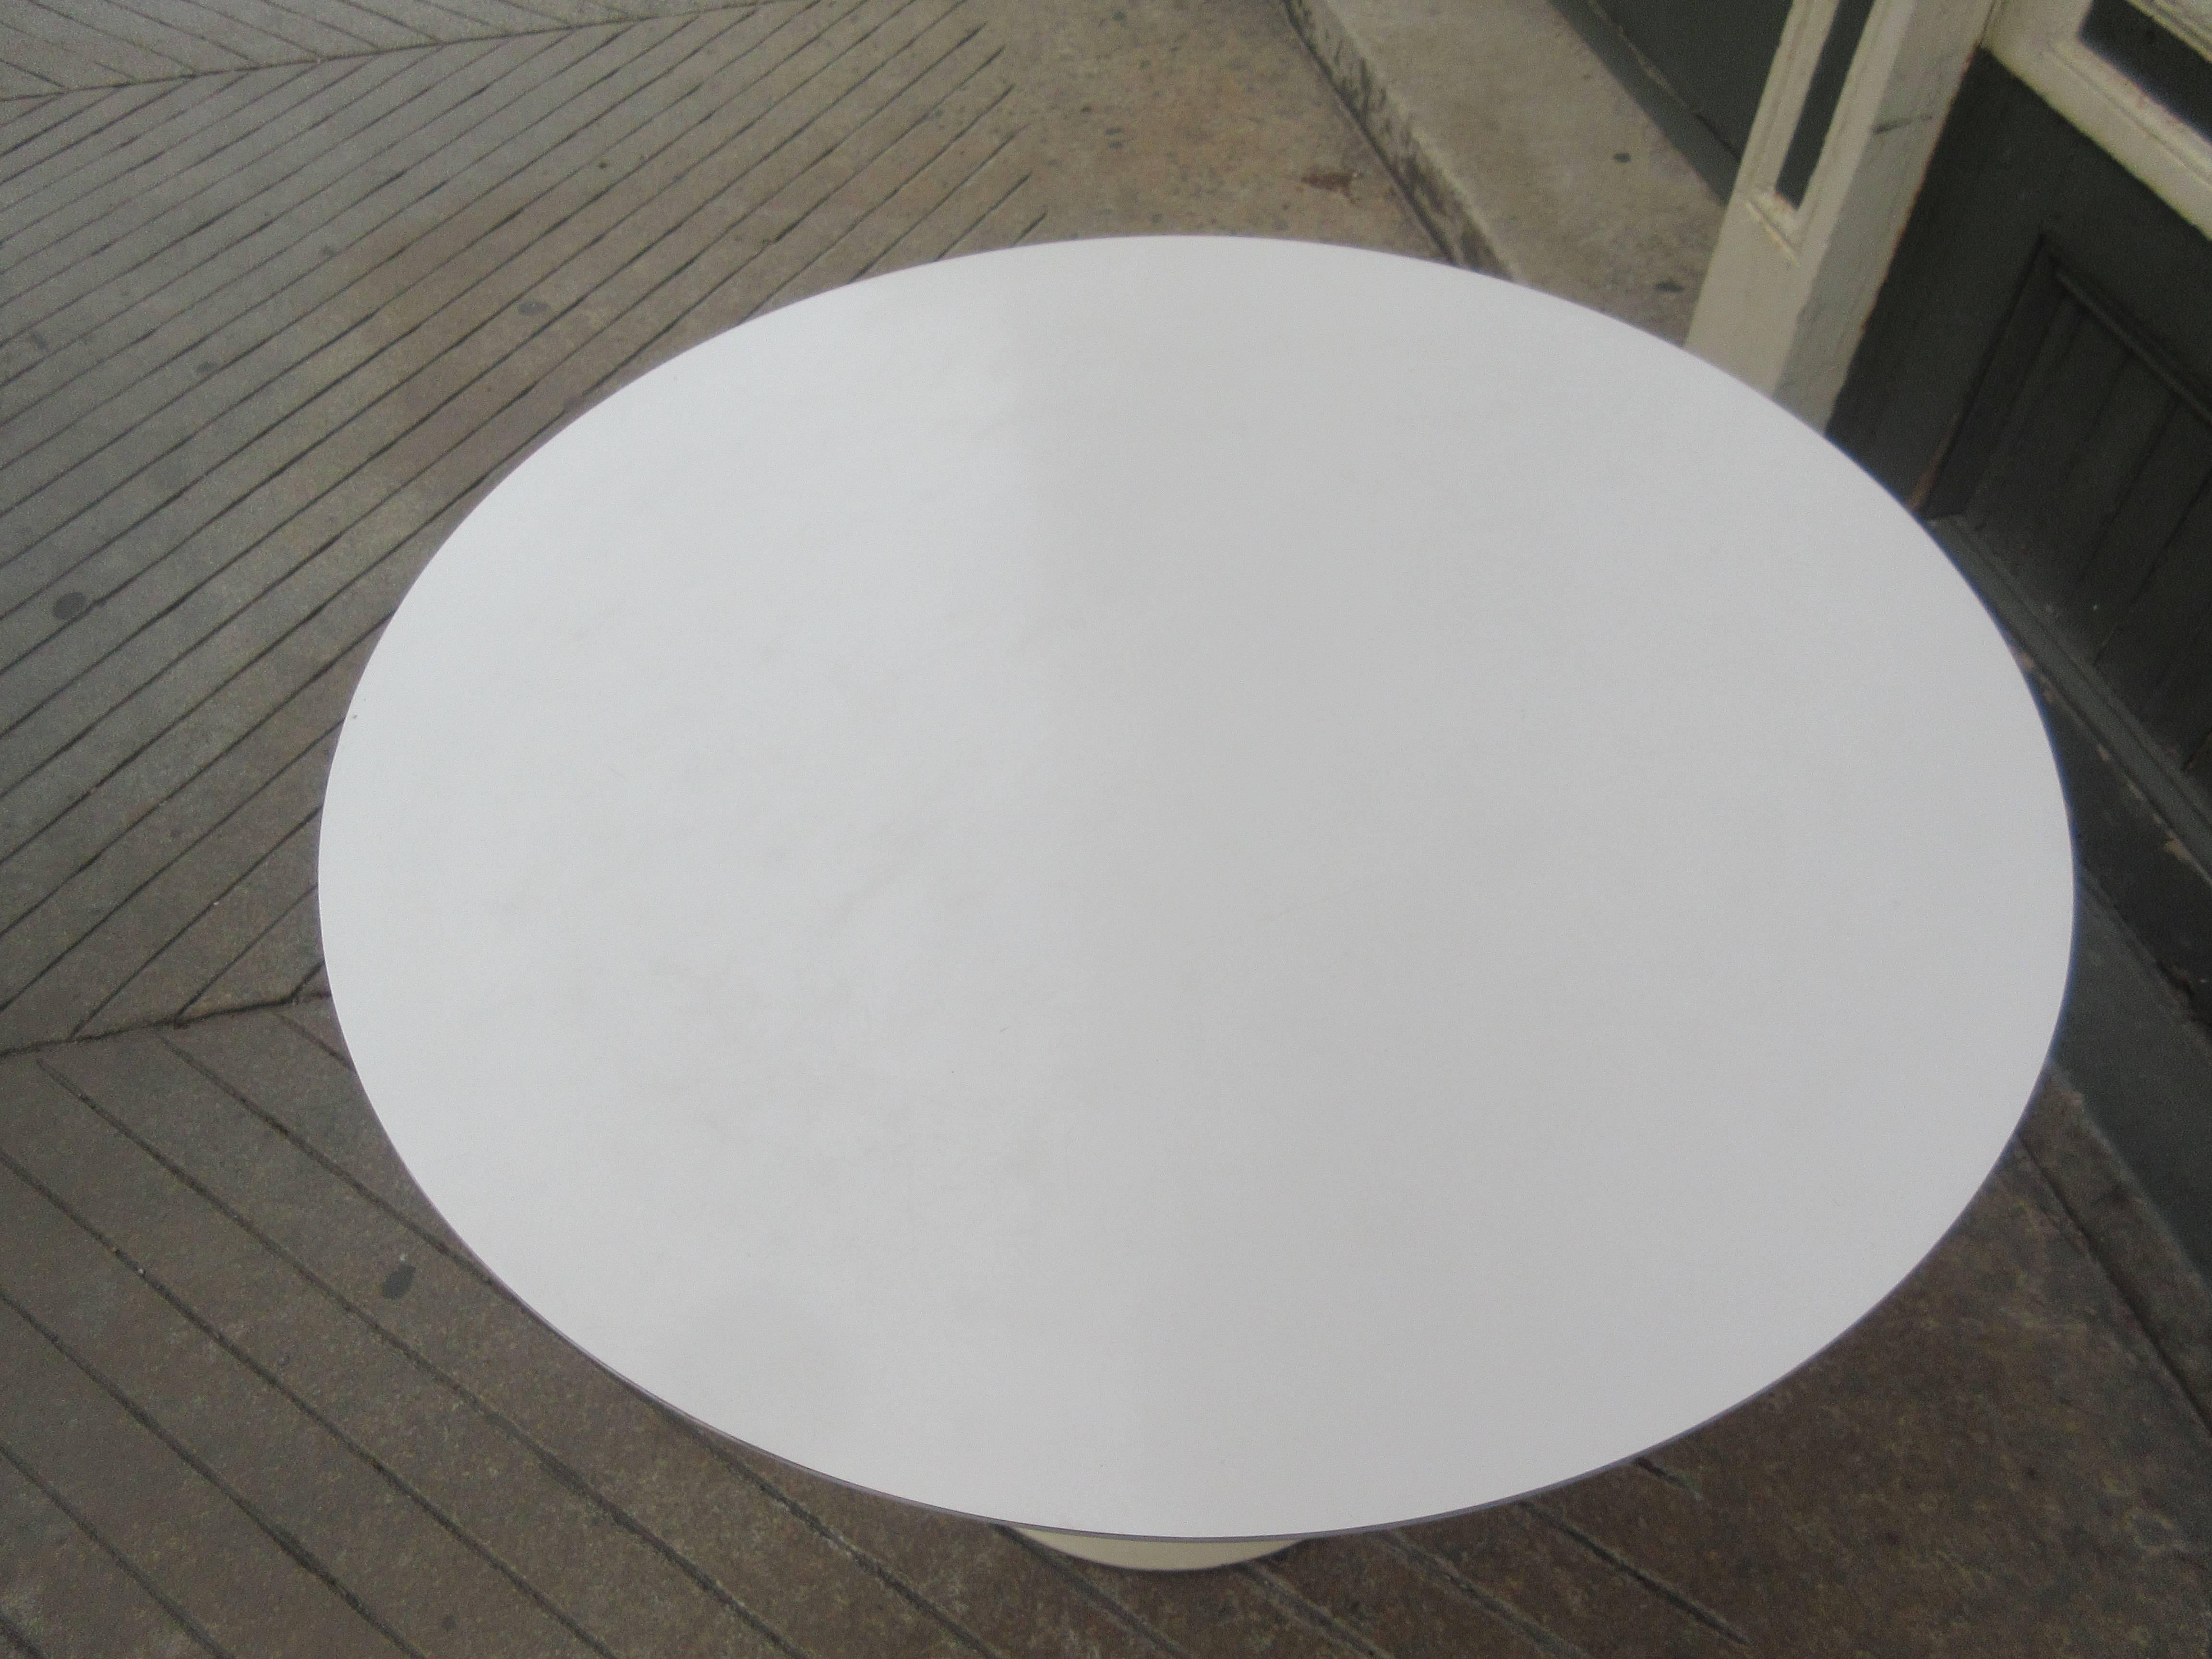 Eero Saarinen for Knoll Associates cast iron base 35.5 inch diameter dining table with laminate top. Cast iron bases were eventually changed to cast aluminum. There is a faint remnant of a Knoll Associates decal.